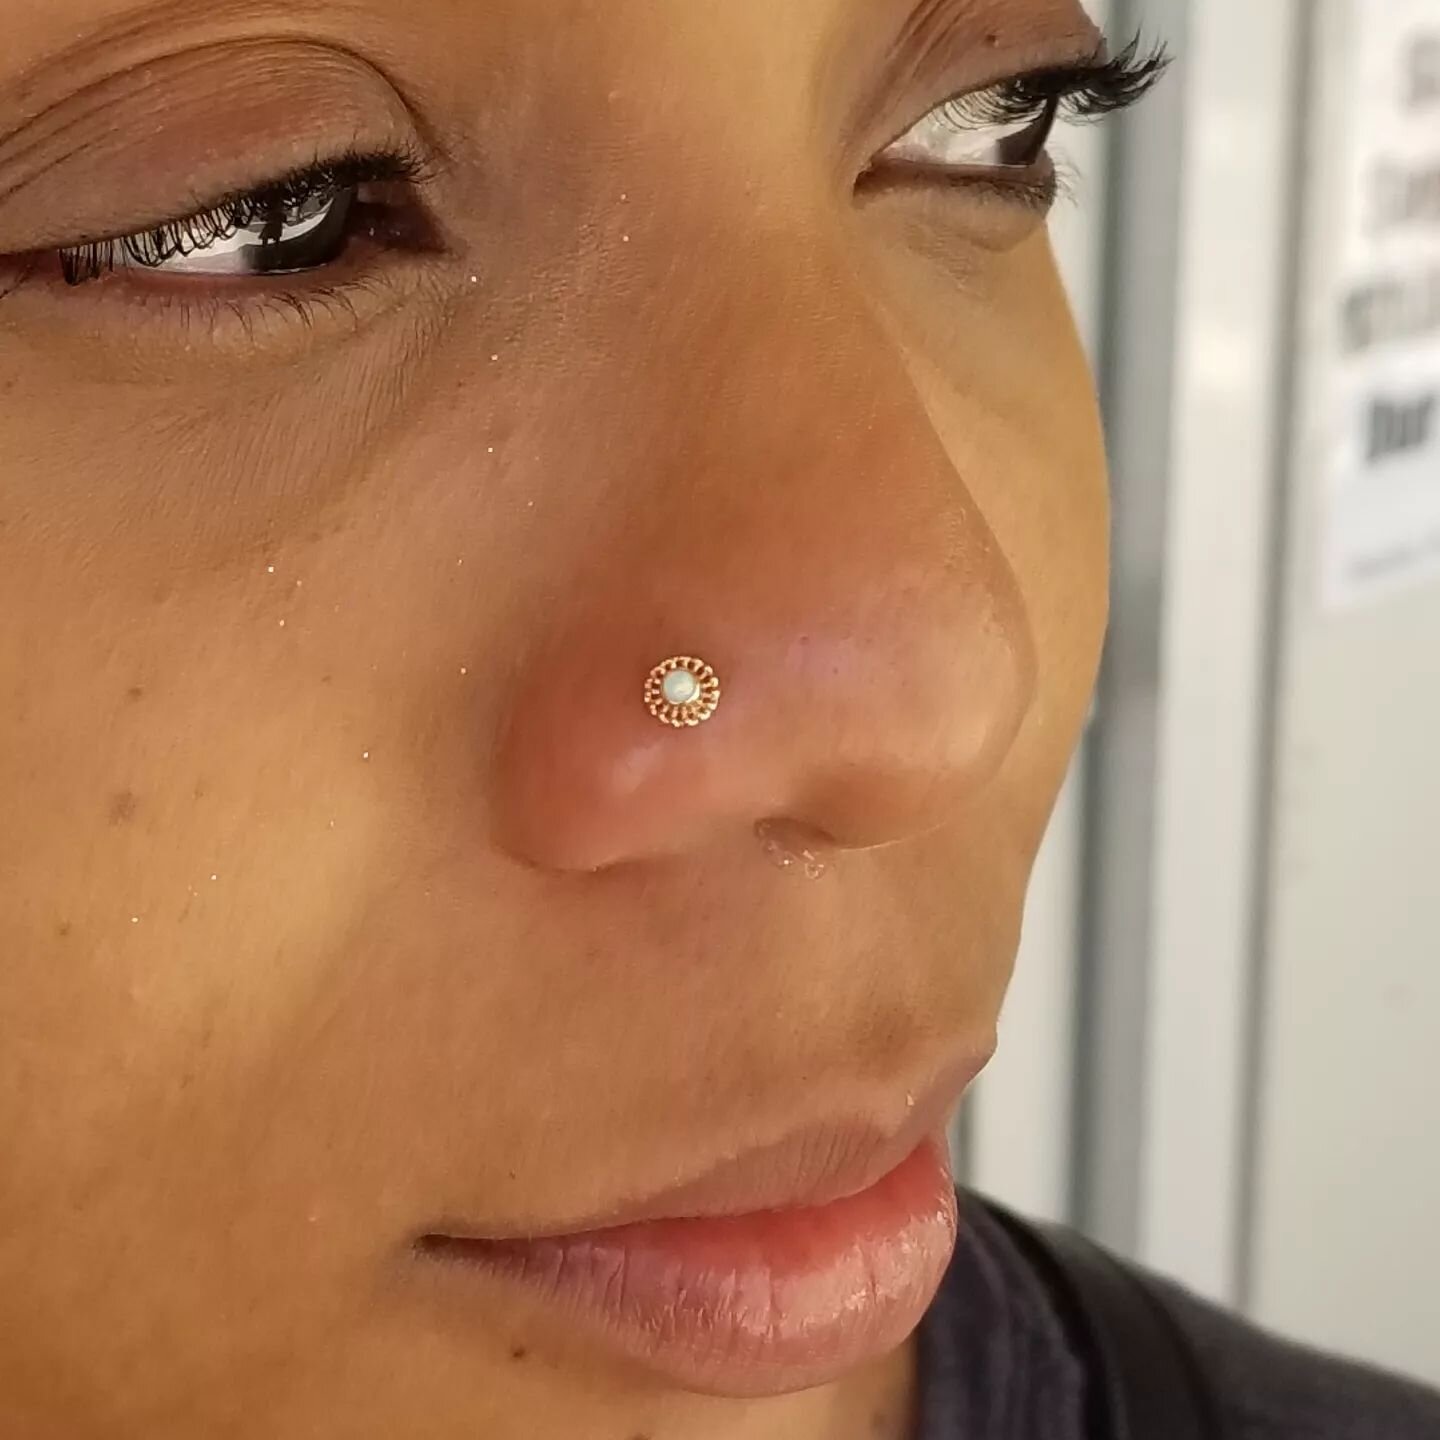 Here's a beautiful nostril piercing that was done by Robert @piercingsbyrobert using a rose gold Virtue end with white opal from @anatometalinc

#nostril #nostrilpiercing #nosepiercing #goldbodyjewelry #goldjewelry #bodyjewelry #bodypiercing #legitbo